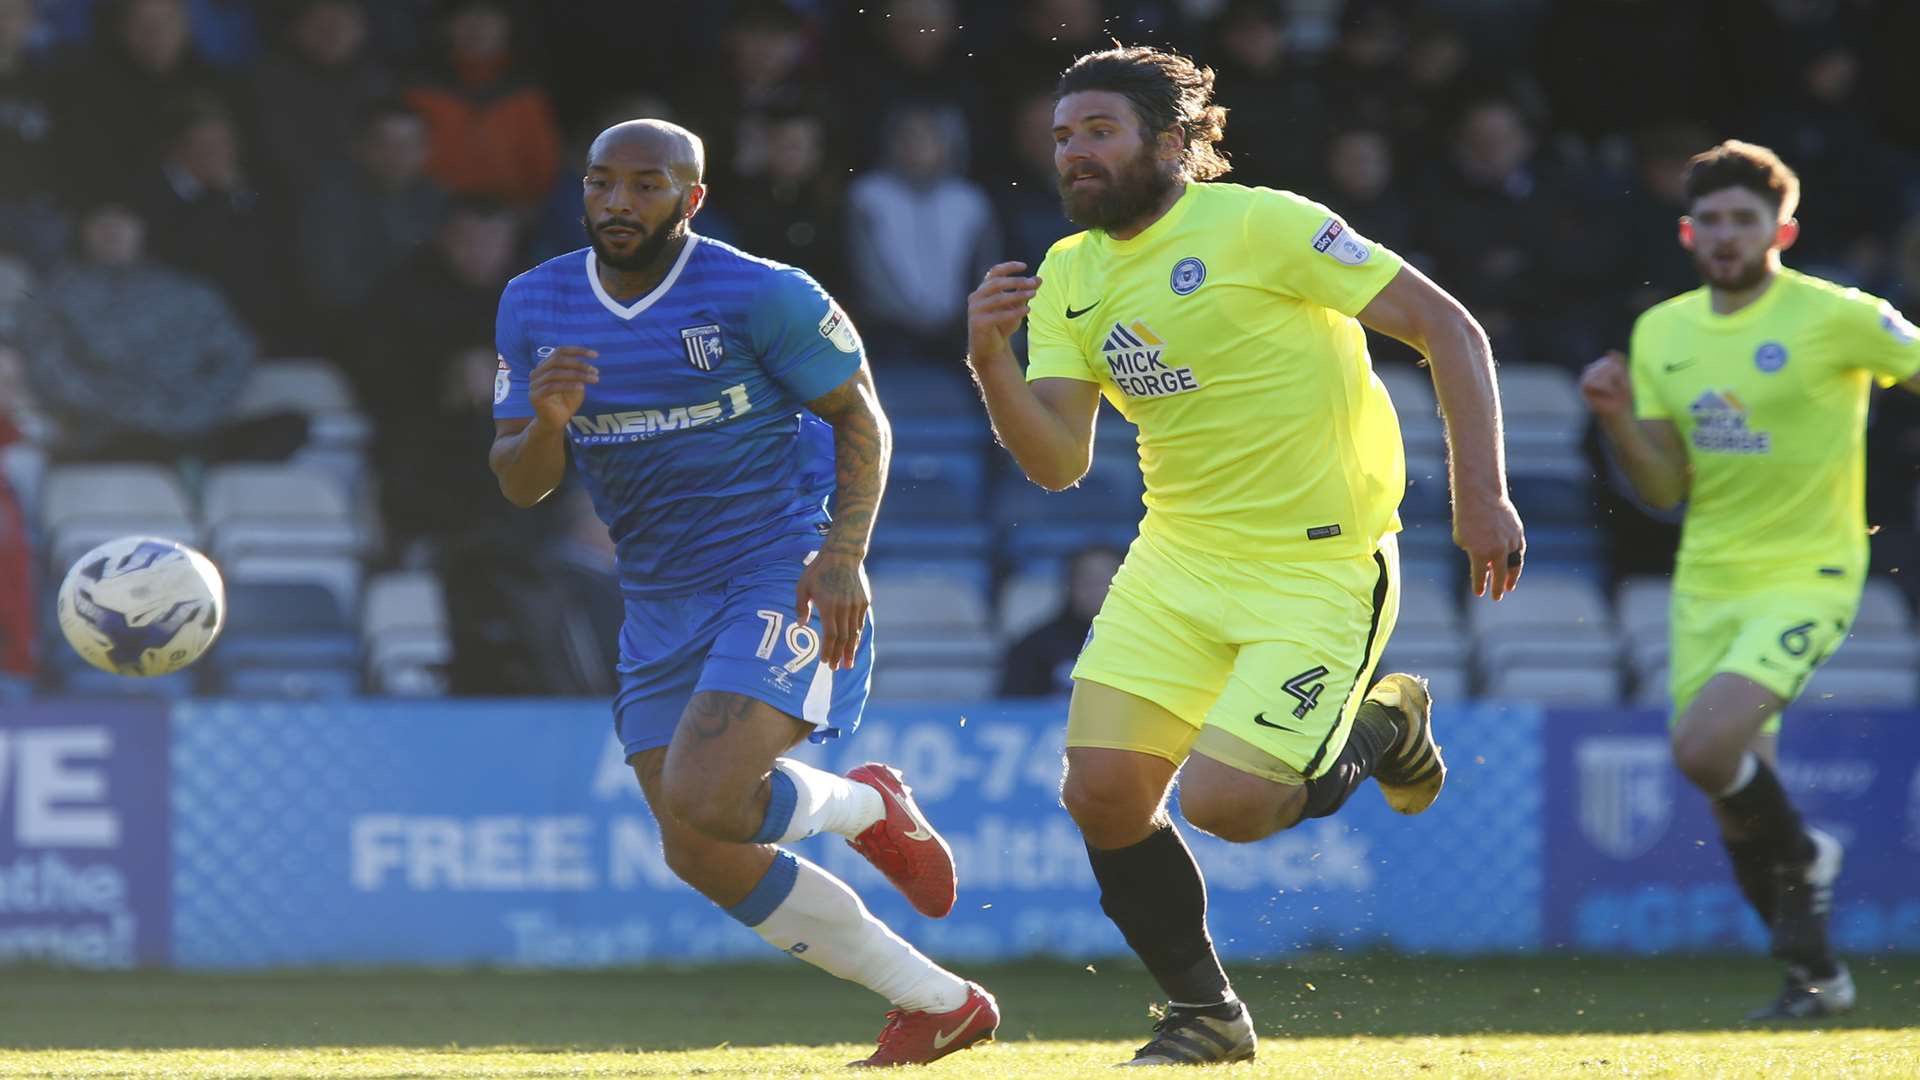 Gills striker Josh Parker in a race for the ball Picture: Andy Jones